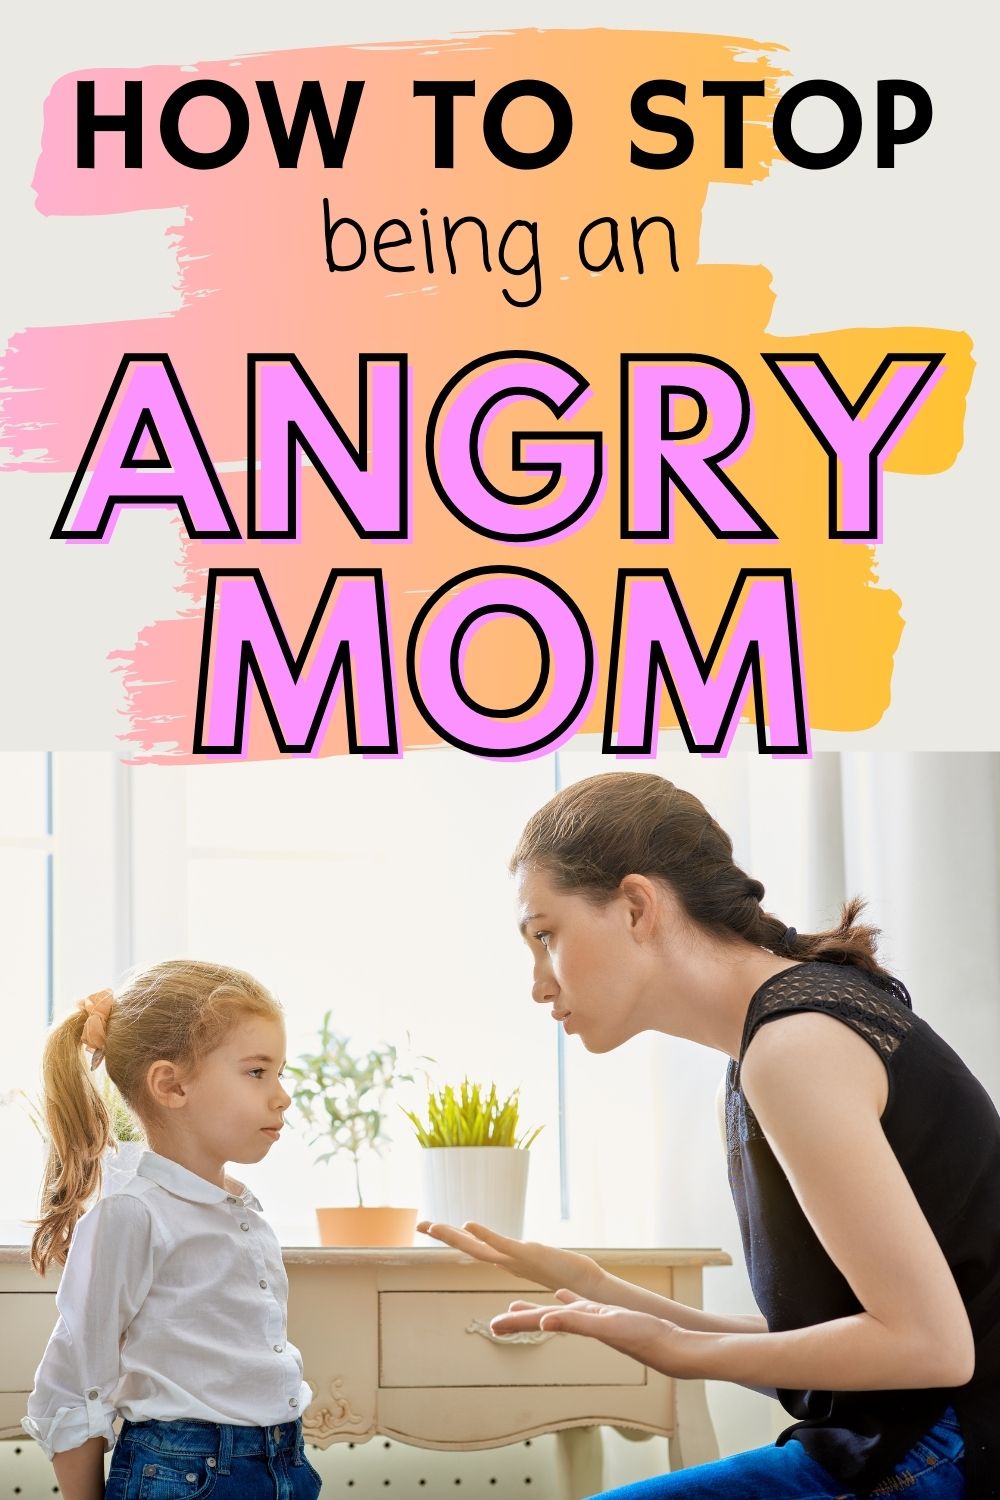 How to be a calm parent | Do you wish you could keep your cool instead of yelling at your kids? I'm sharing 10 strategies to help. Make sure to read these tips on self-control for moms. #selfcontrol #mom #anger #learning #practicing #selfcontrol #angrymom #hownottobeangry #calm #howtocontroltemper #peaceful #parenting #howtobeagoodmom #staycalm #momlife #hacks #motherhood #parenthood #nordicparenting #positiveparenting #family #raisingkids #children #findyourmomtribe